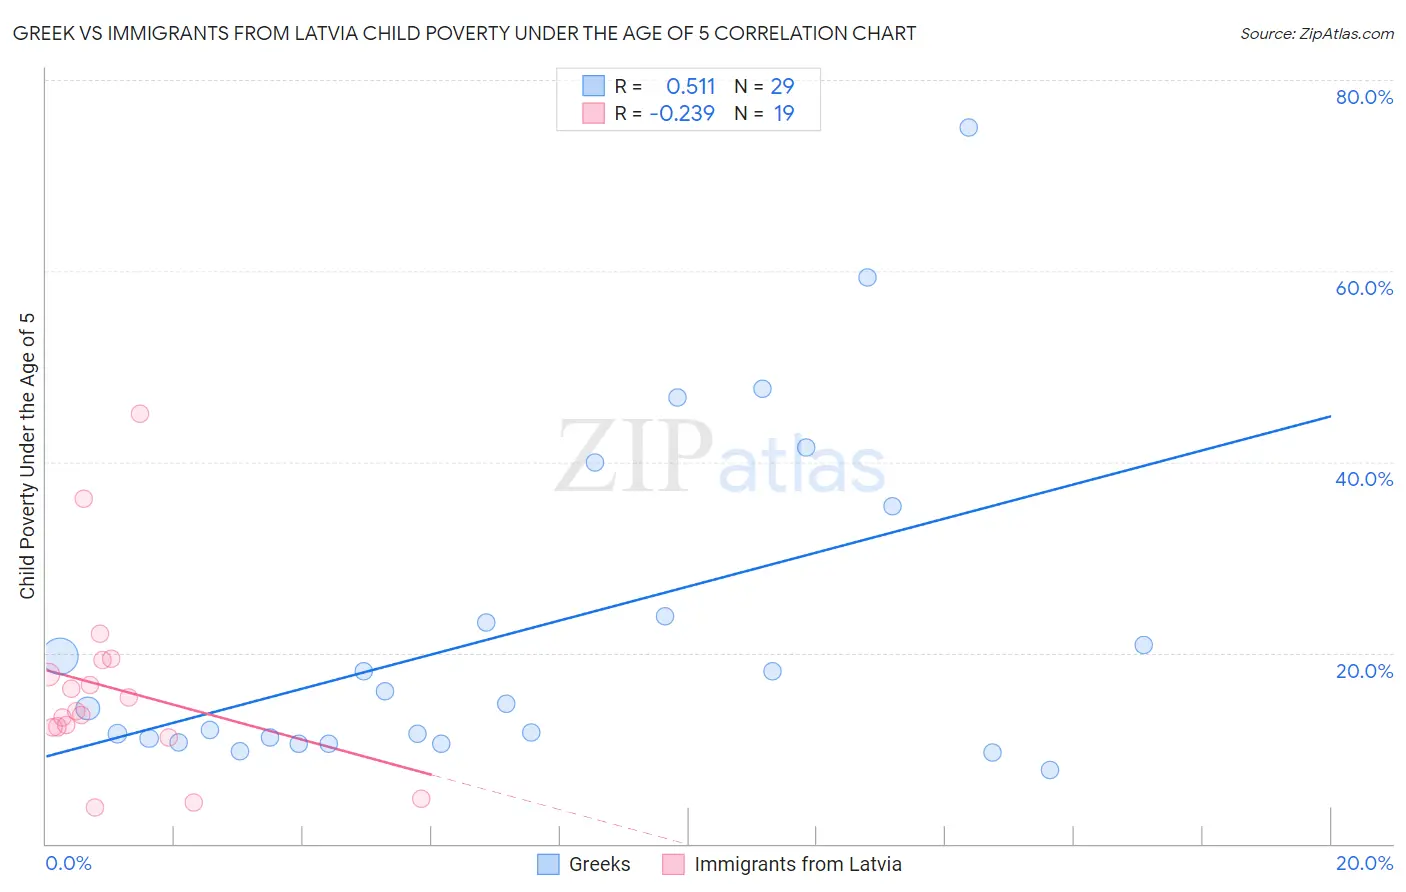 Greek vs Immigrants from Latvia Child Poverty Under the Age of 5